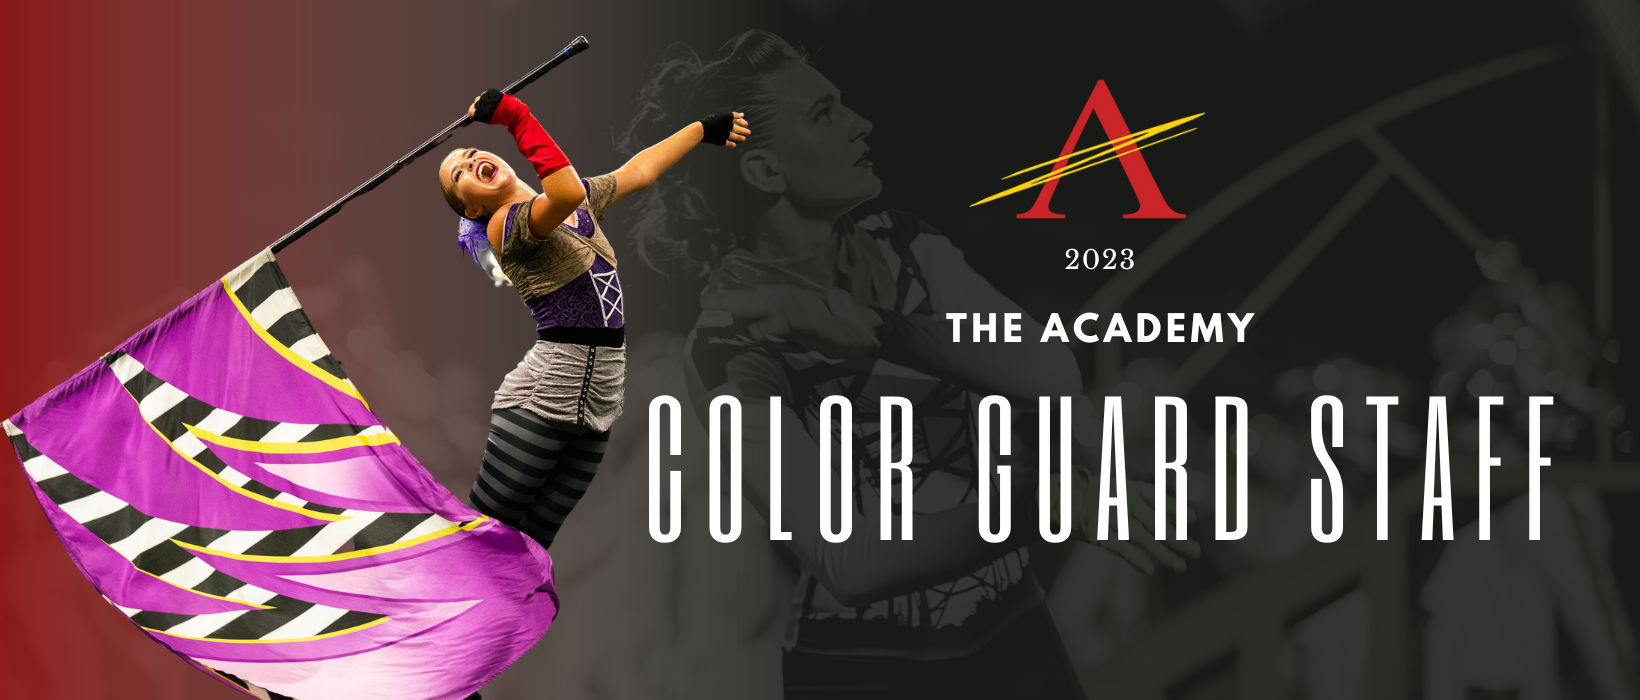 https://www.arizonaacademy.org/wp-content/uploads/2022/12/Color-Guard-Staff-Web-Banner.png